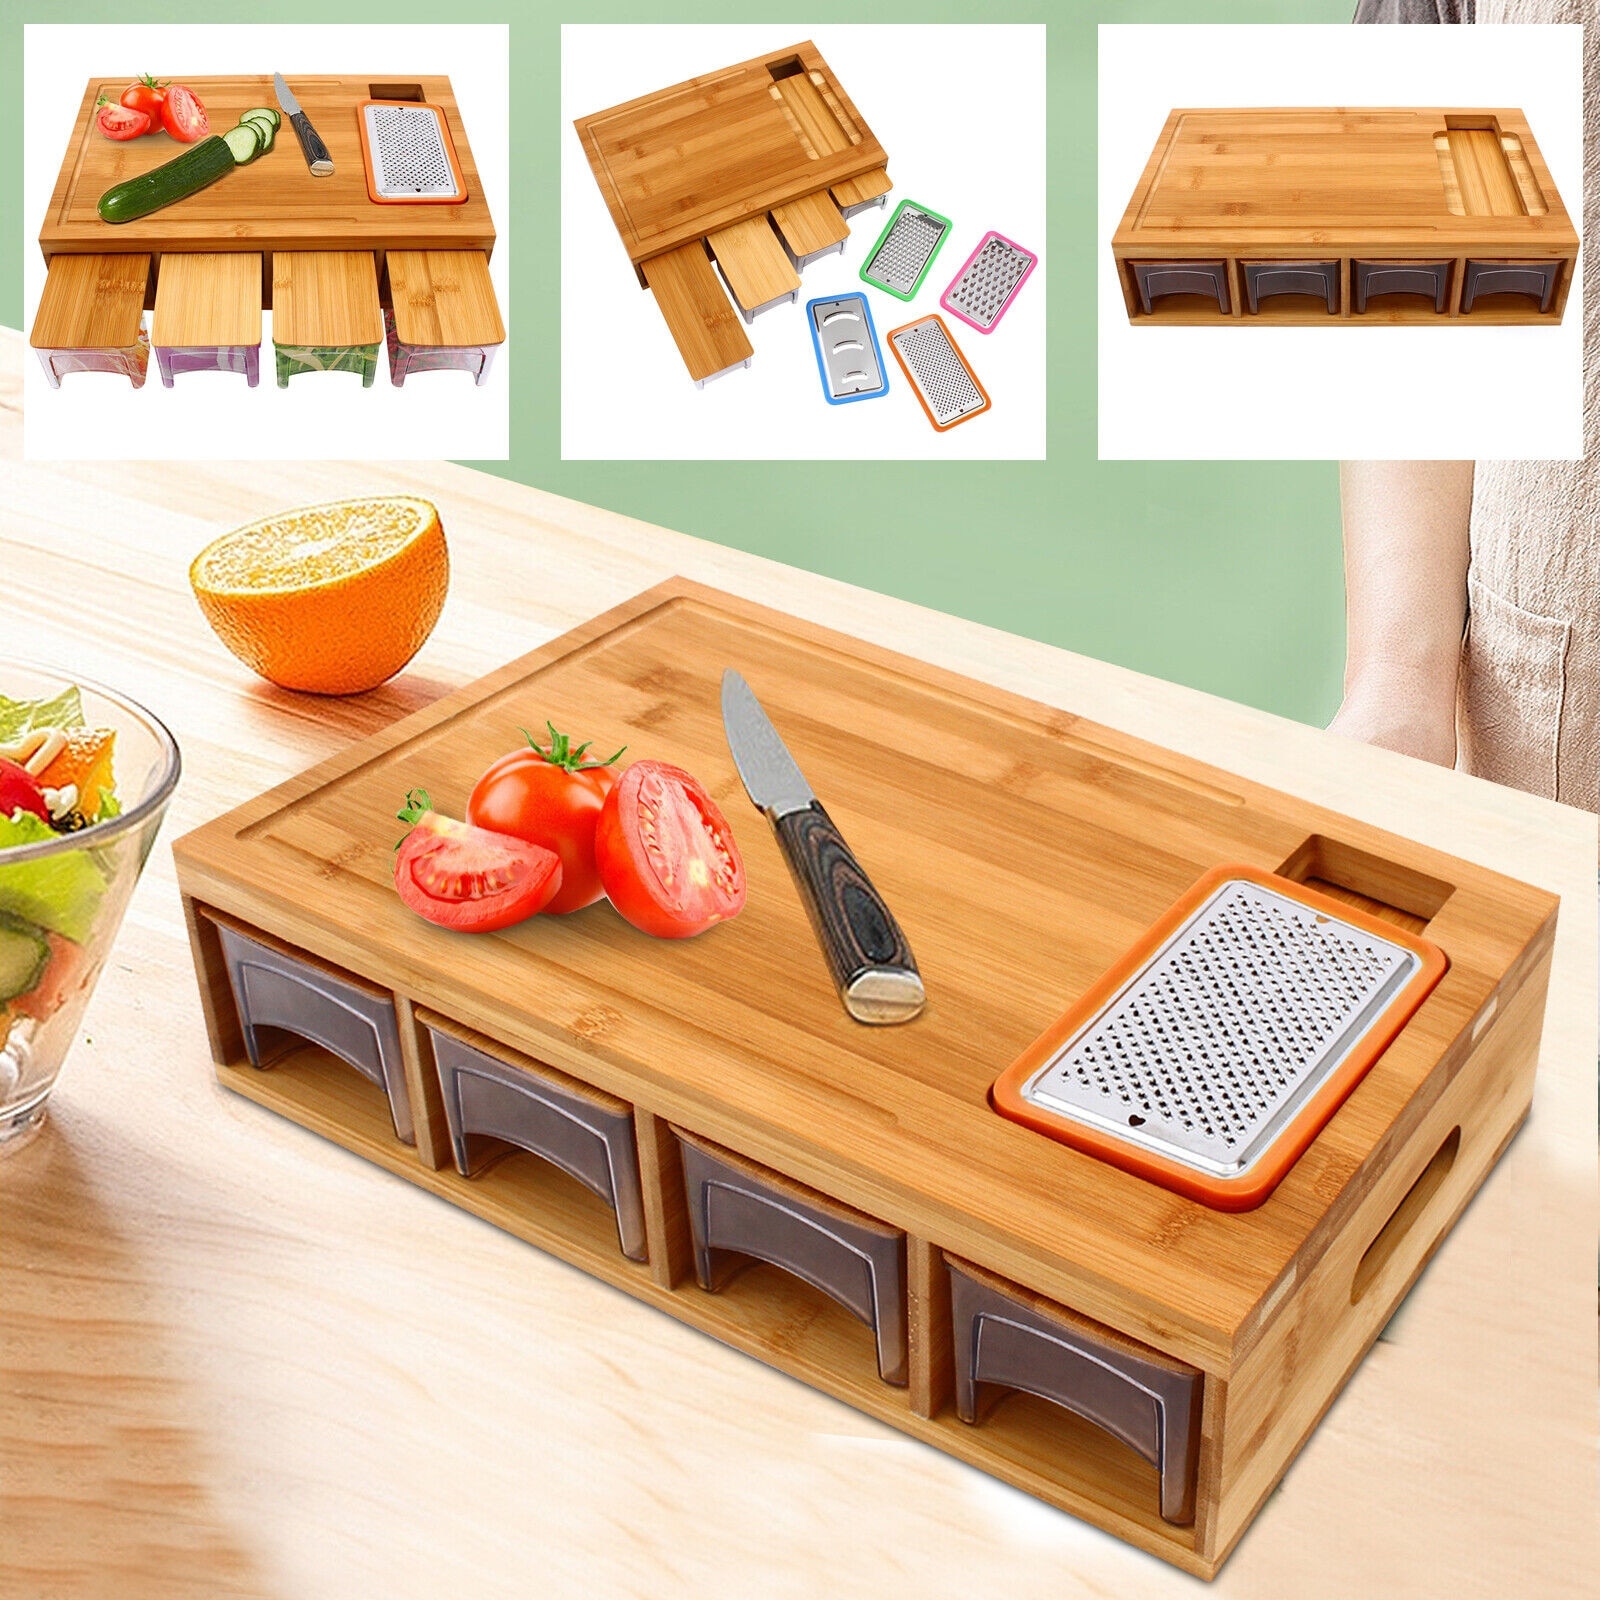 https://ak1.ostkcdn.com/images/products/is/images/direct/f812673dd4519579702ee09ba0d00727d20b52ec/Organic-Bamboo-Cutting-Board-with-4-Containers.jpg